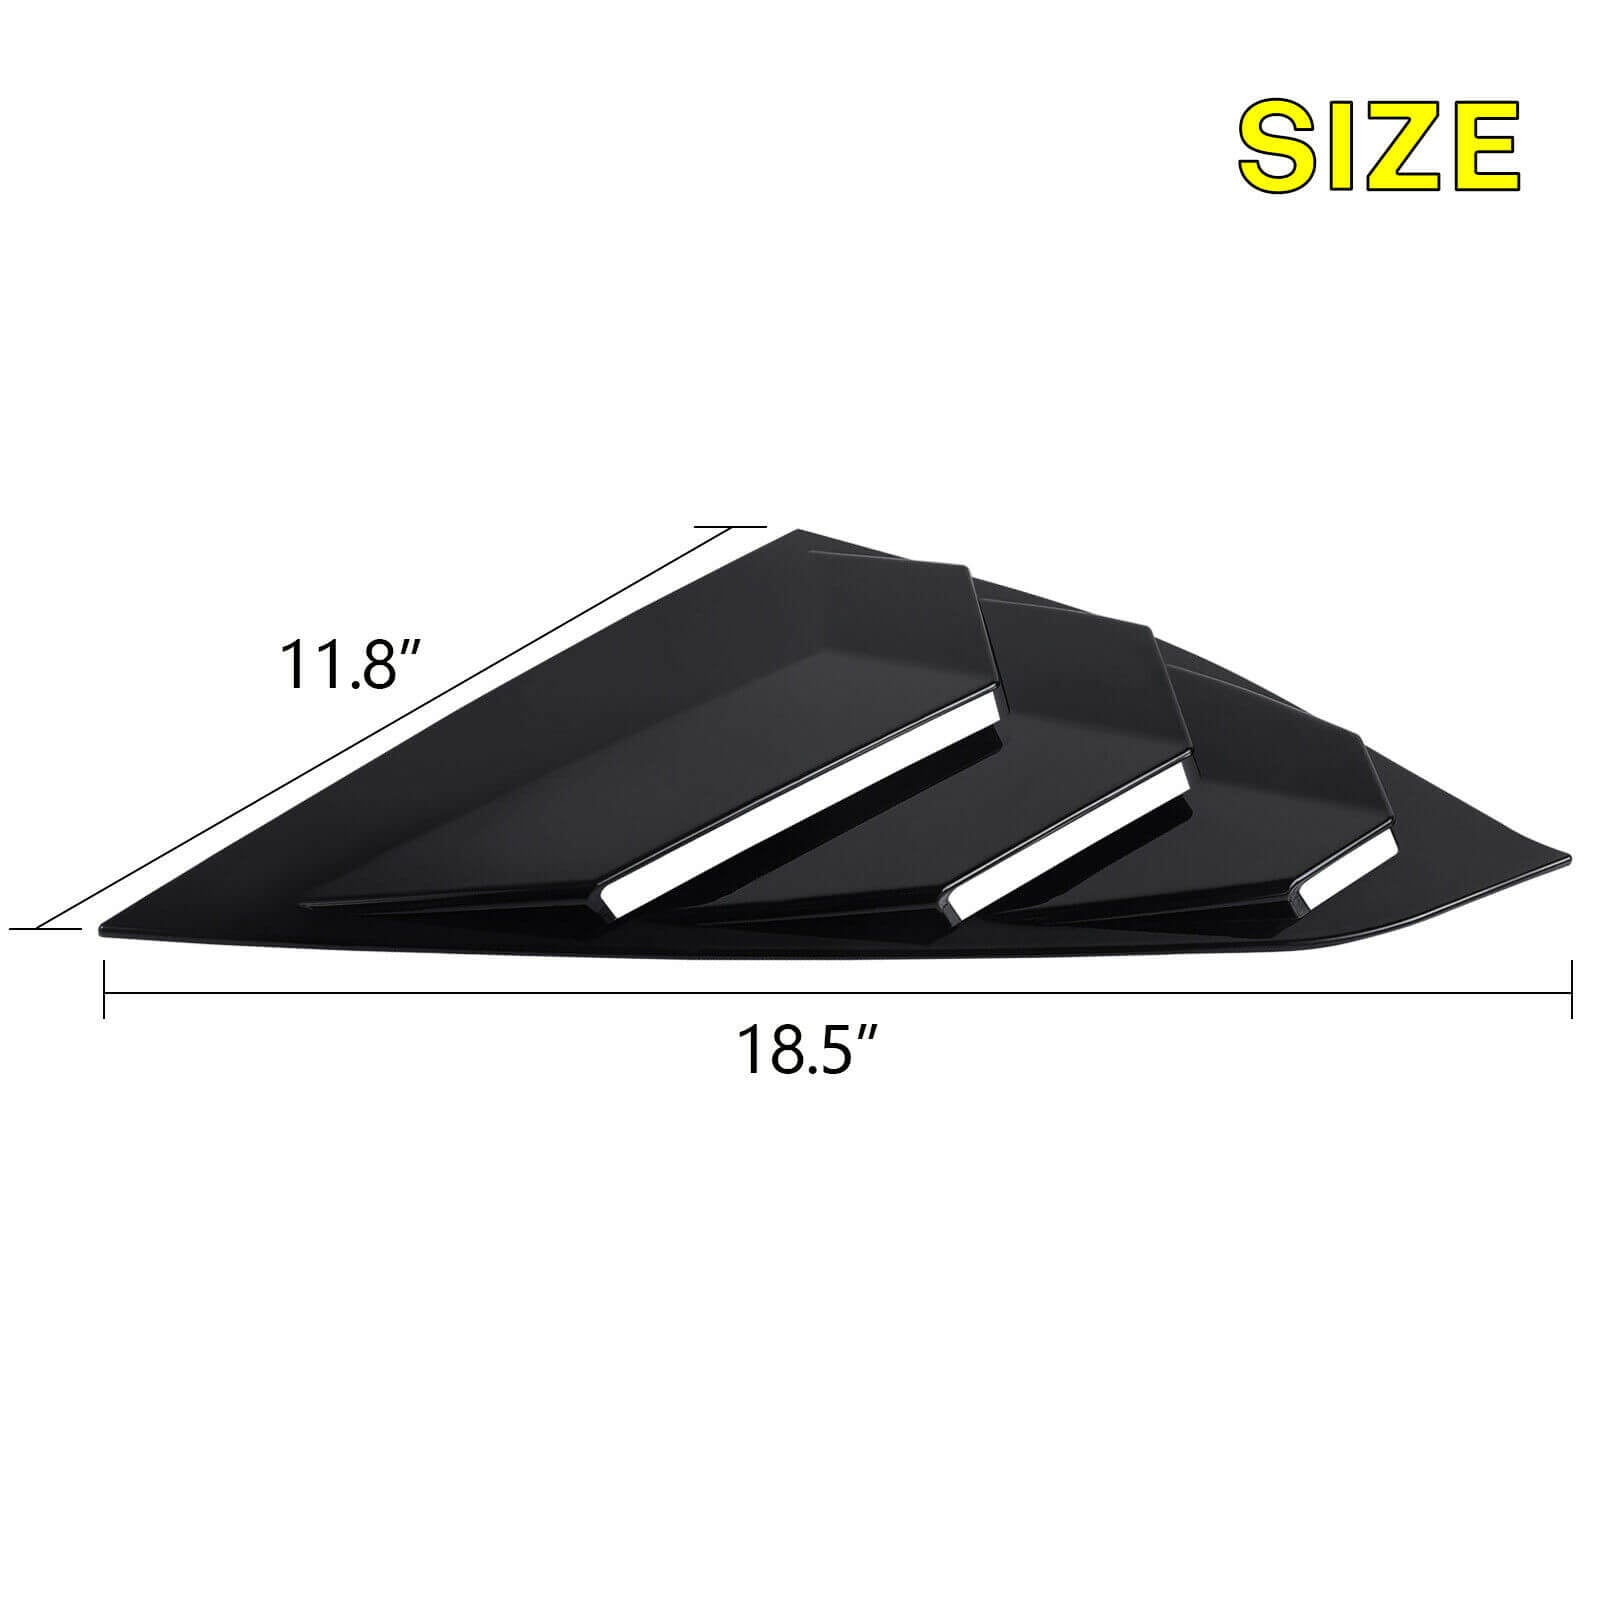 Size of Side Vent Rear Window Louver for 2018+ Honda Accord